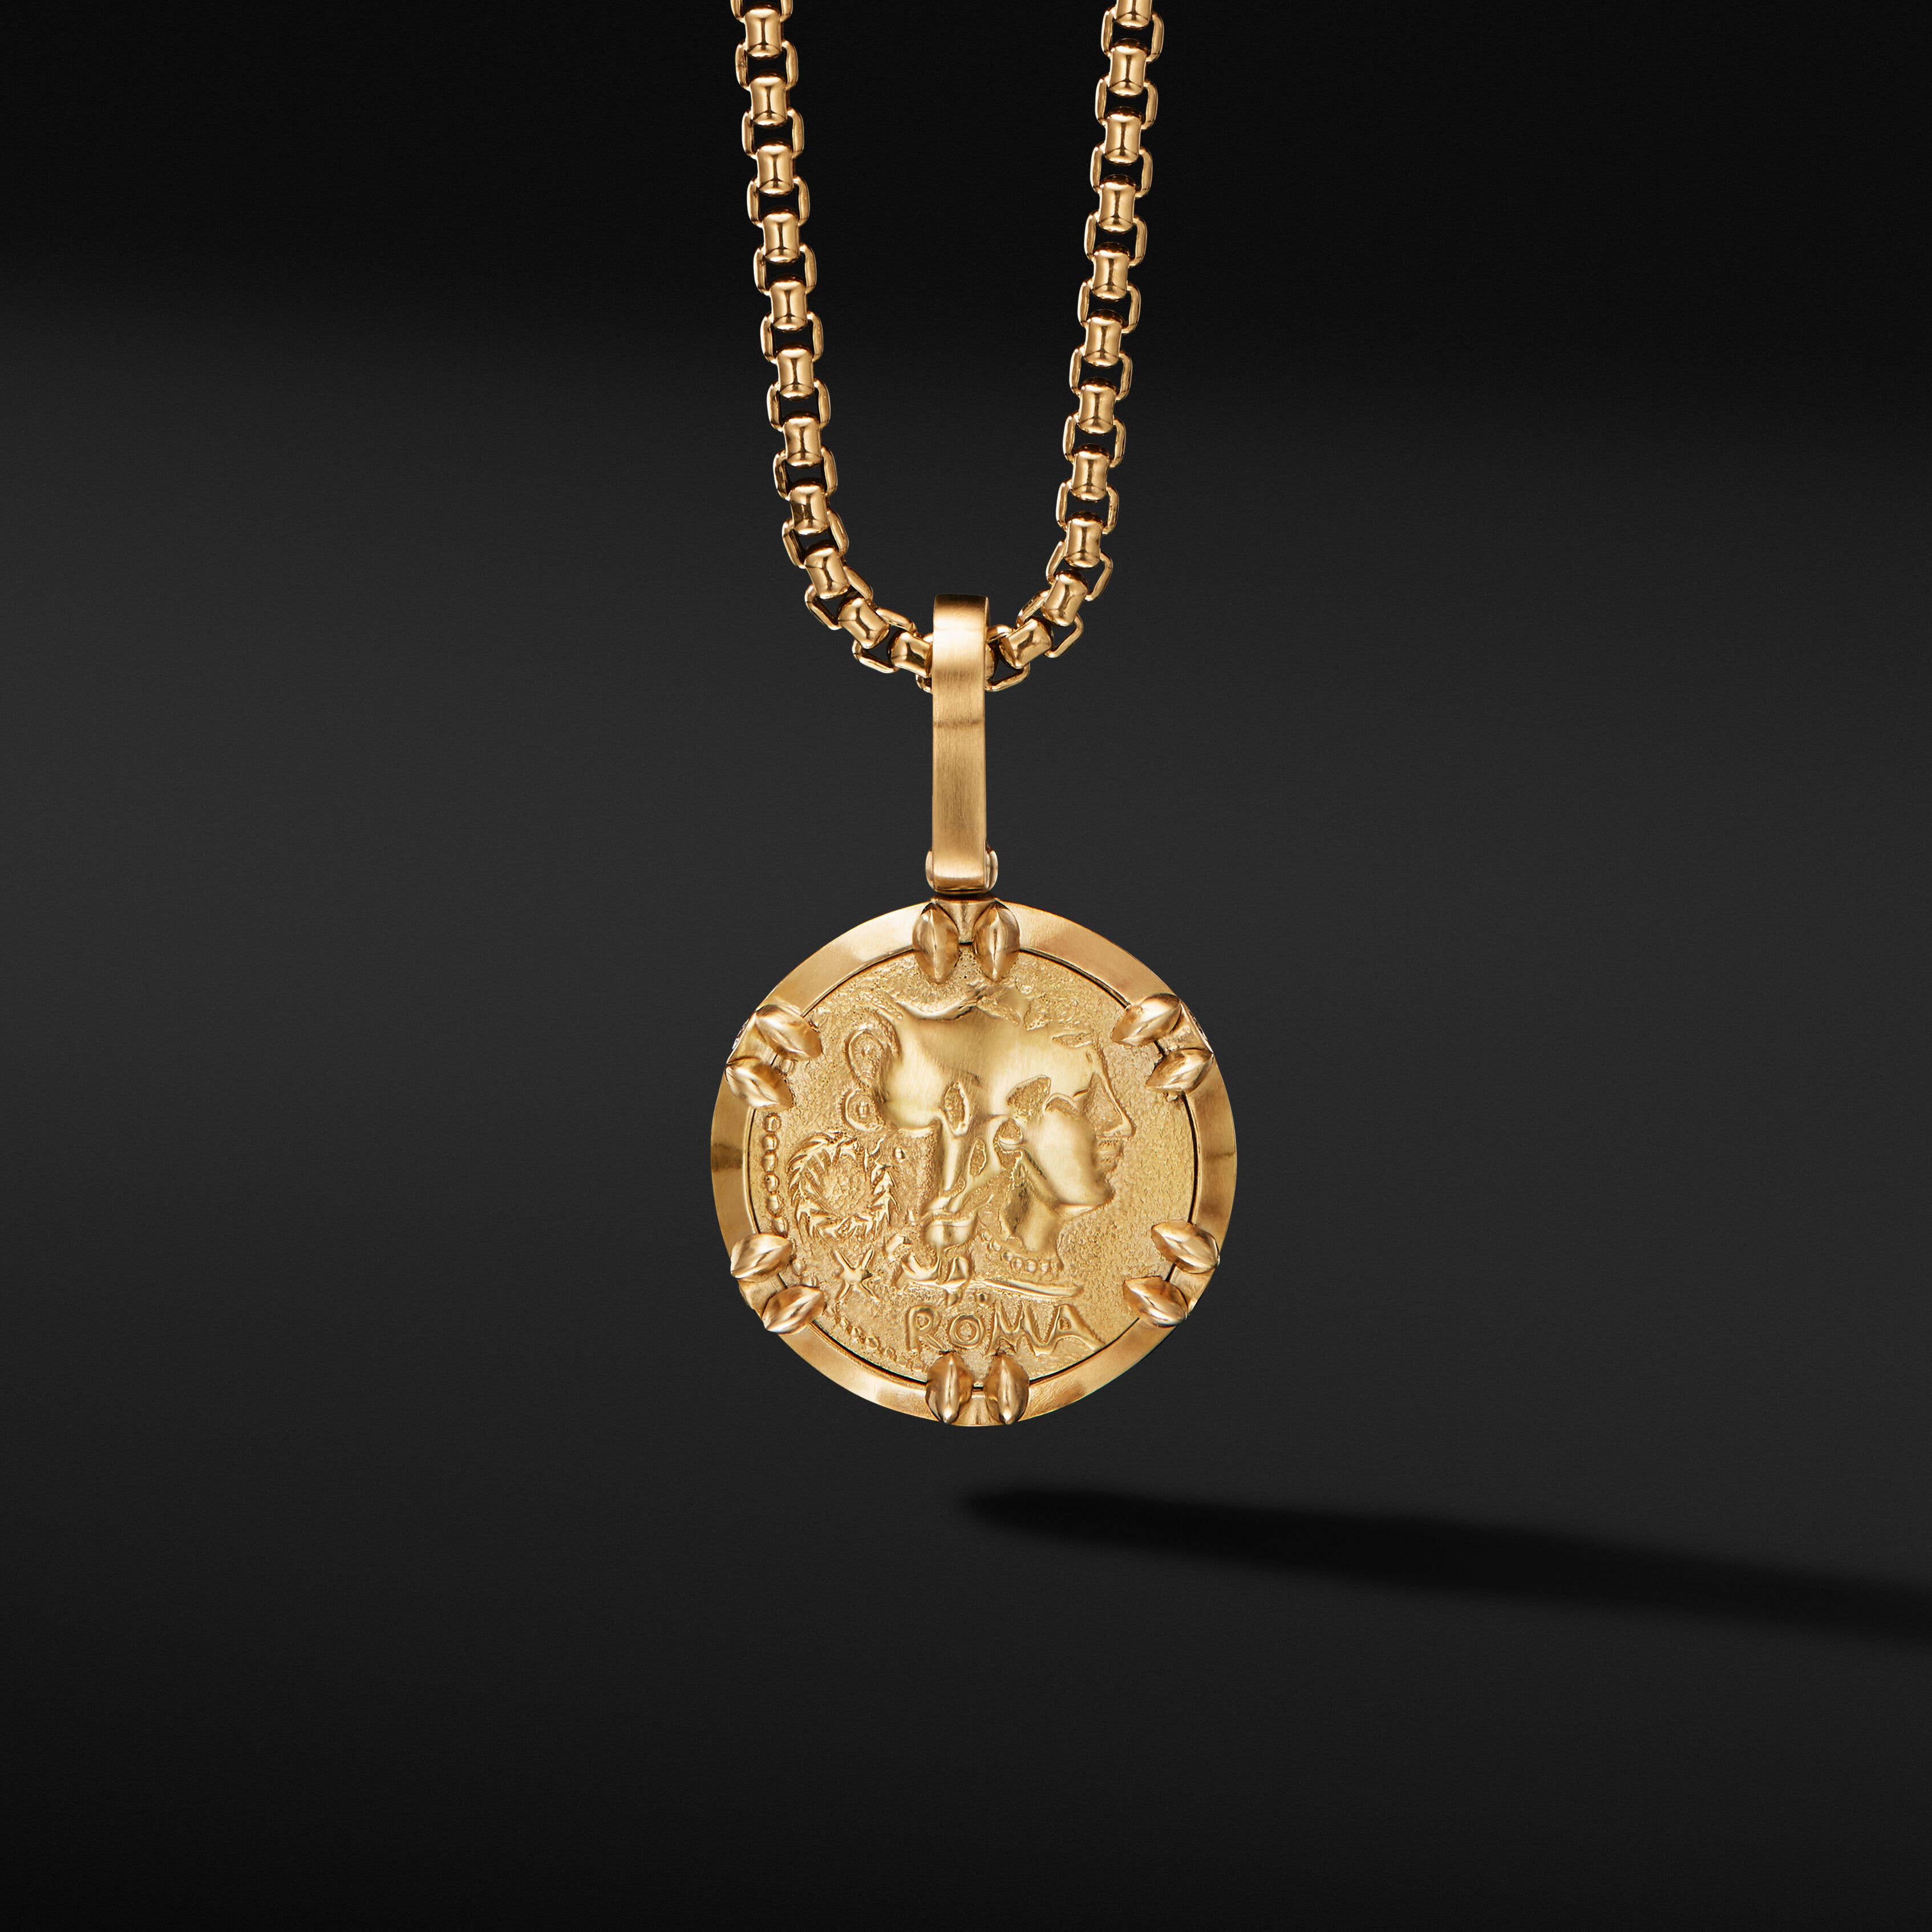 Roman Reversible Amulet in 18K Yellow Gold with Diamonds